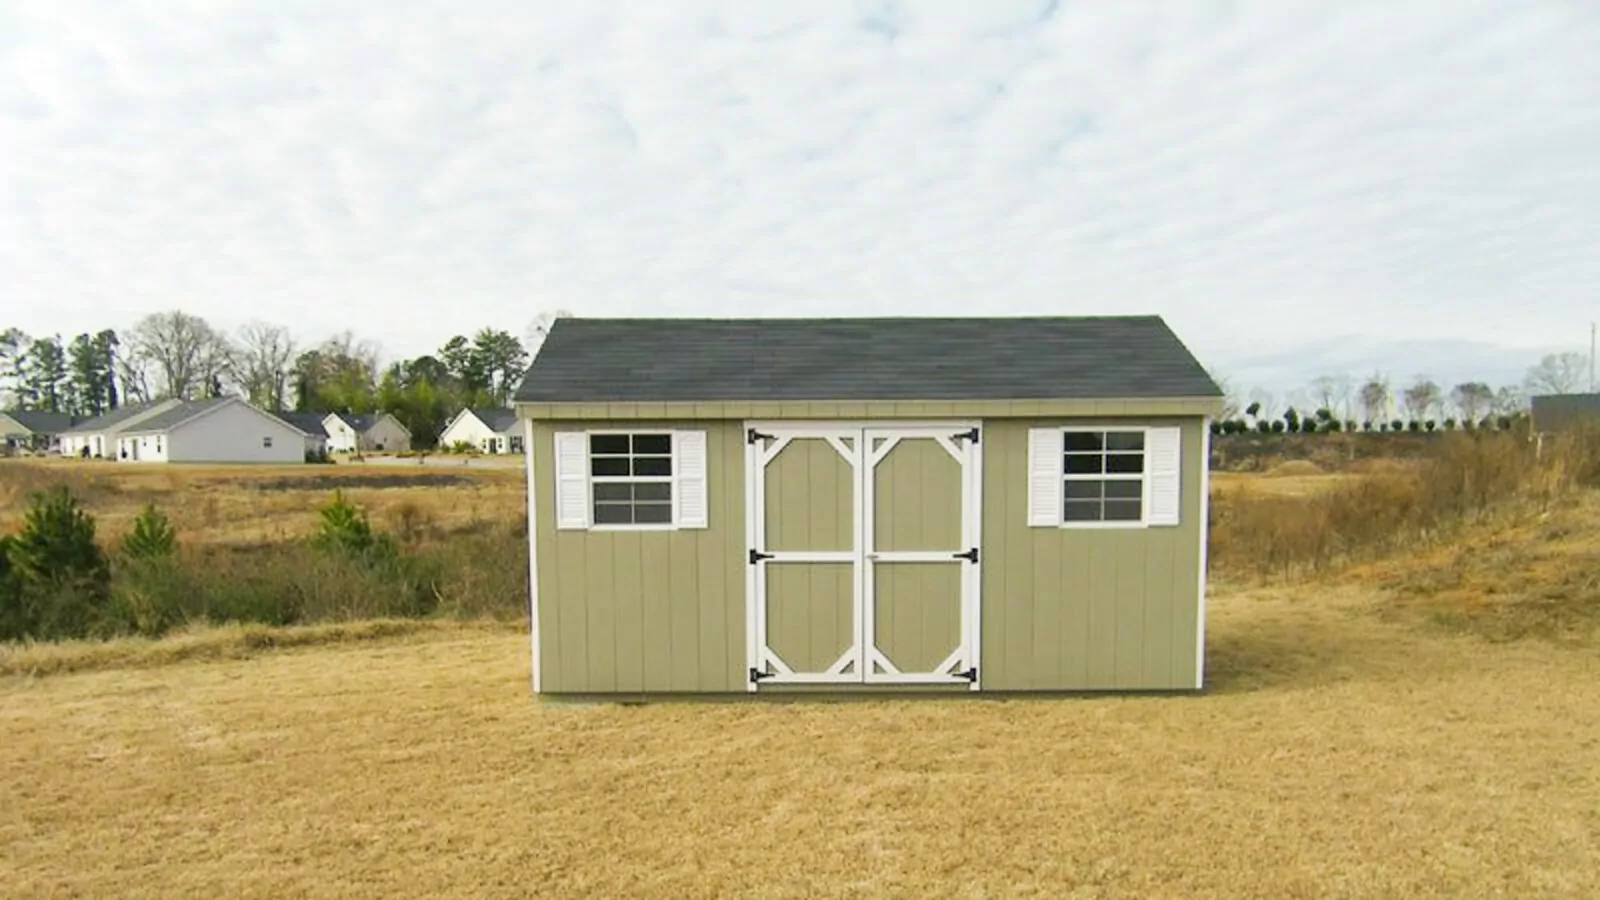 Beautiful shed following shed permit guidelines in GA.